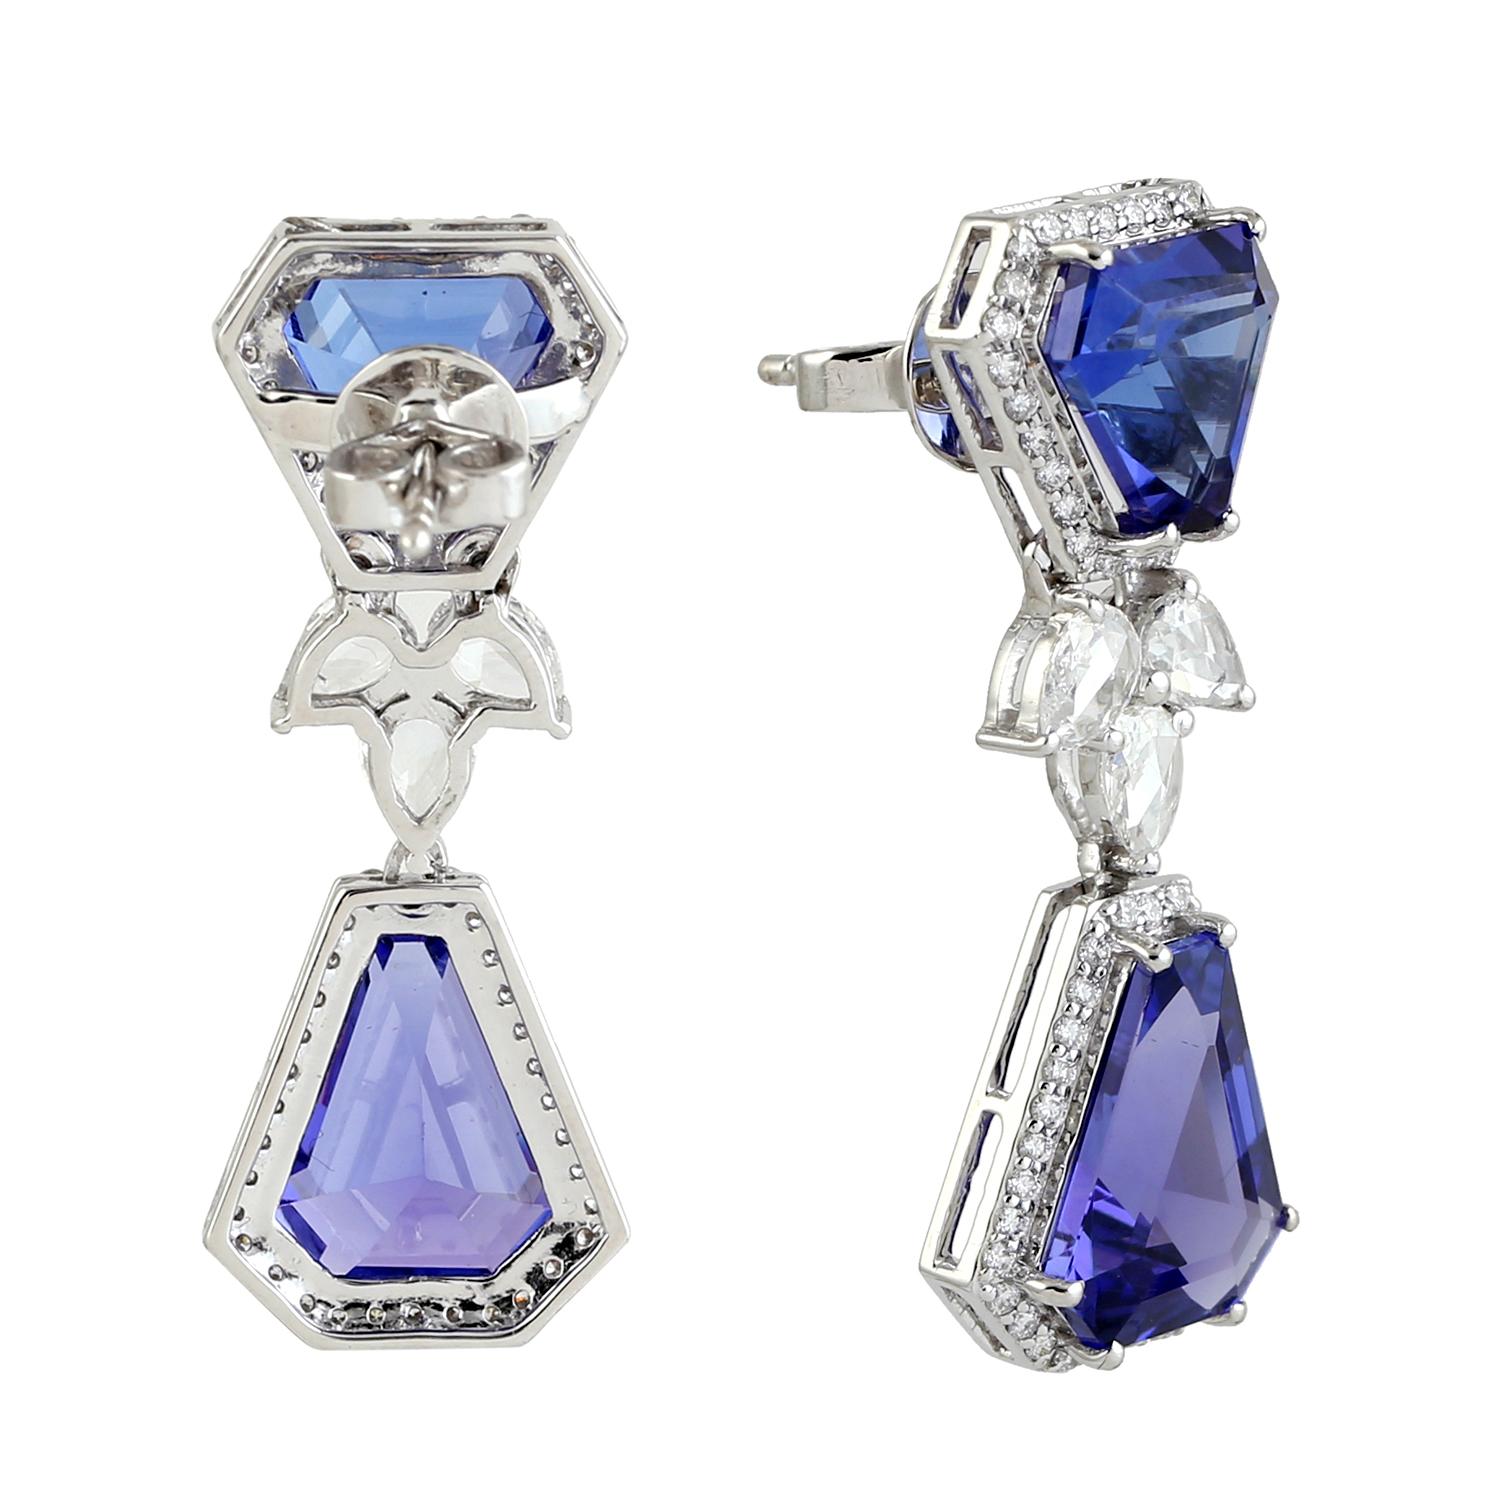 Mixed Cut 17.47ct Blue Tanzanite Dangle Earrings With Rosecut Diamonds In 18k White Gold For Sale